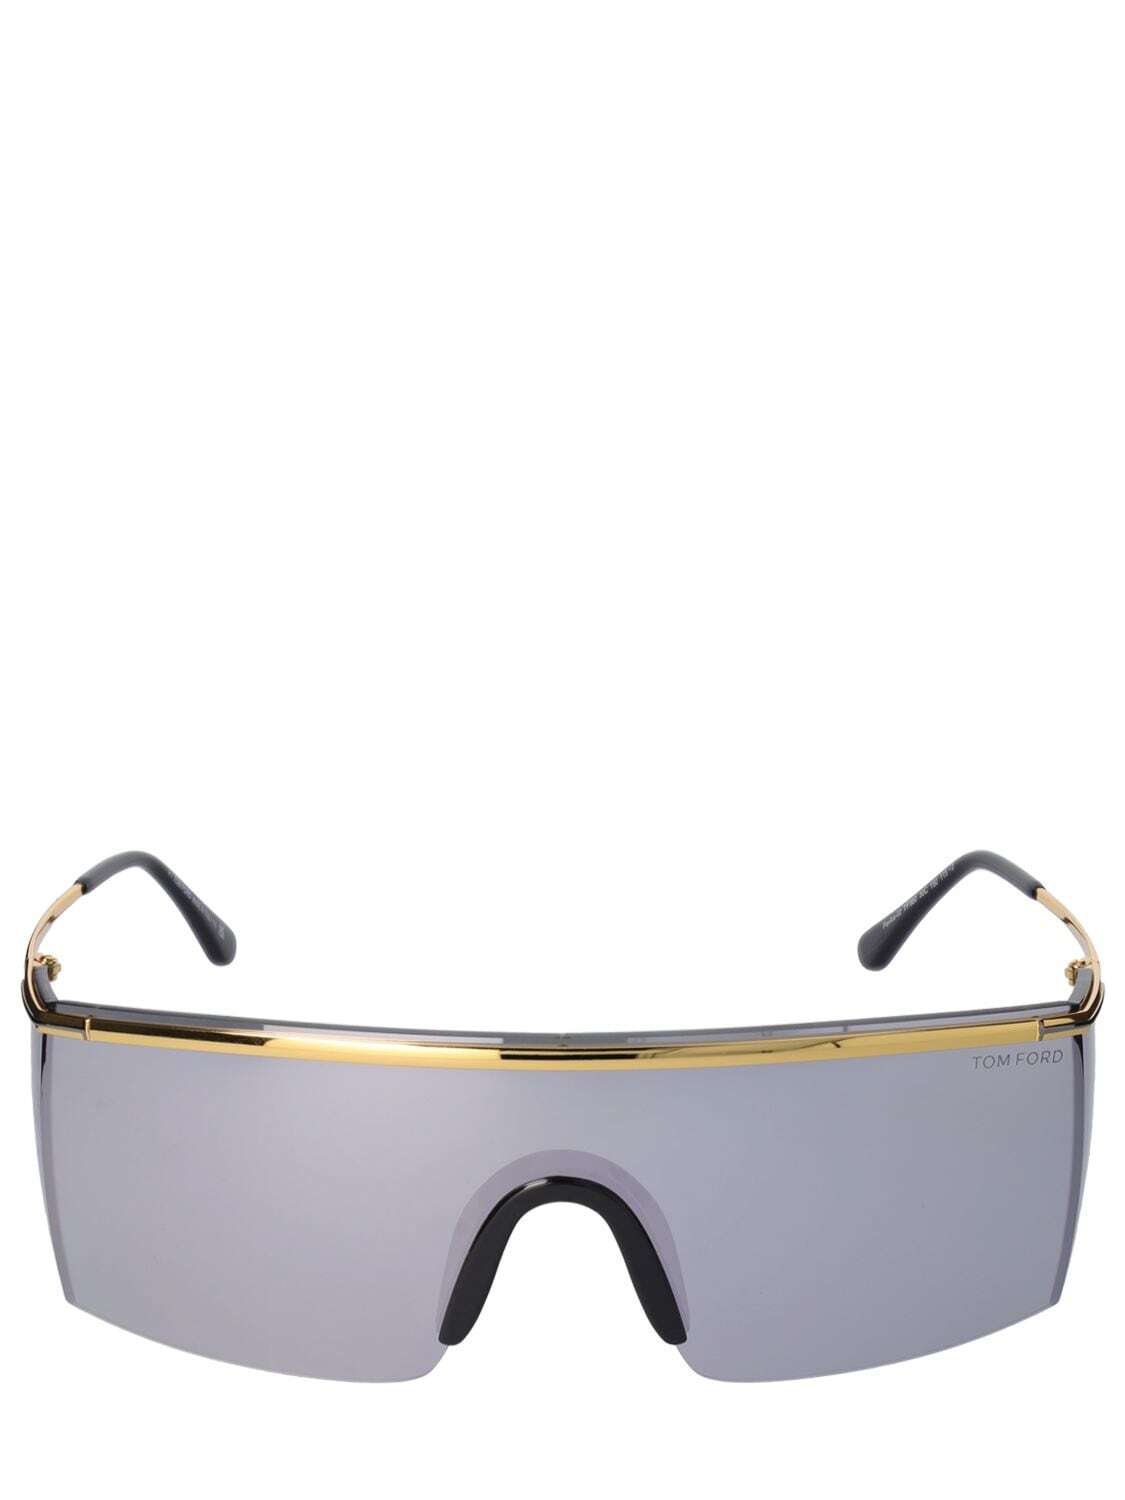 TOM FORD Pavlos Squared Metal Sunglasses in gold